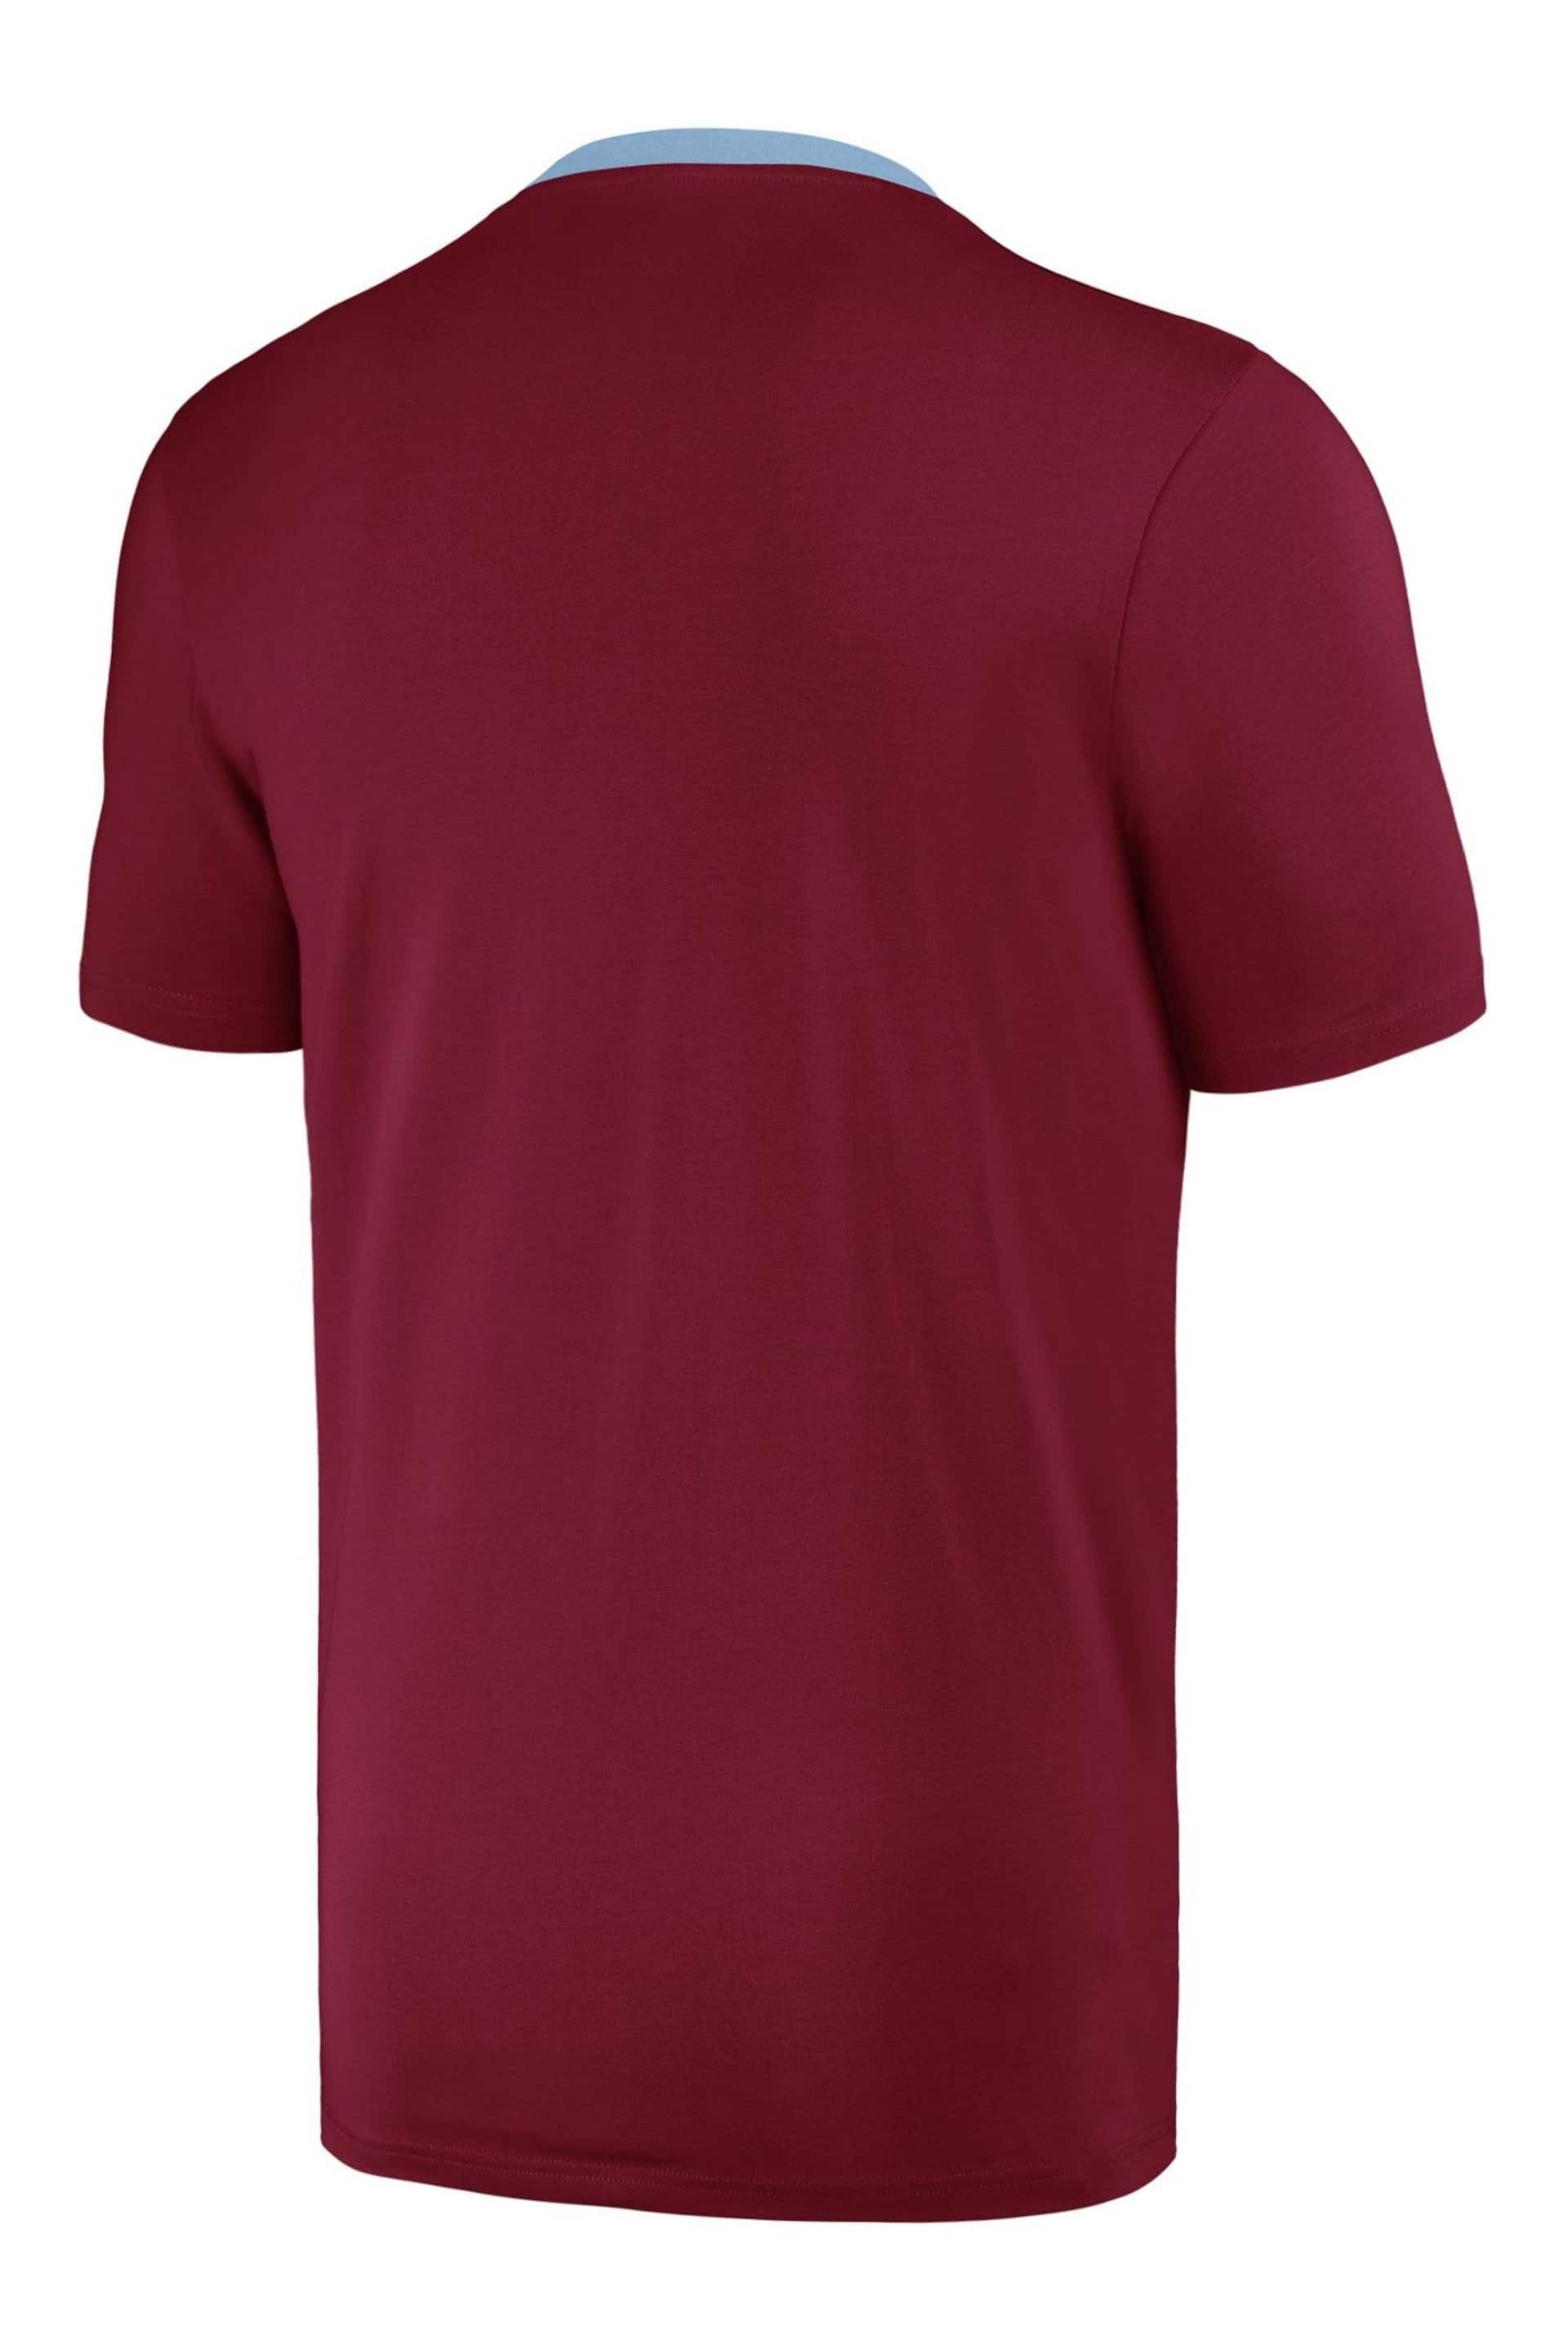 Castore Red Aston Villa Home Match Day Top - Image 3 of 3